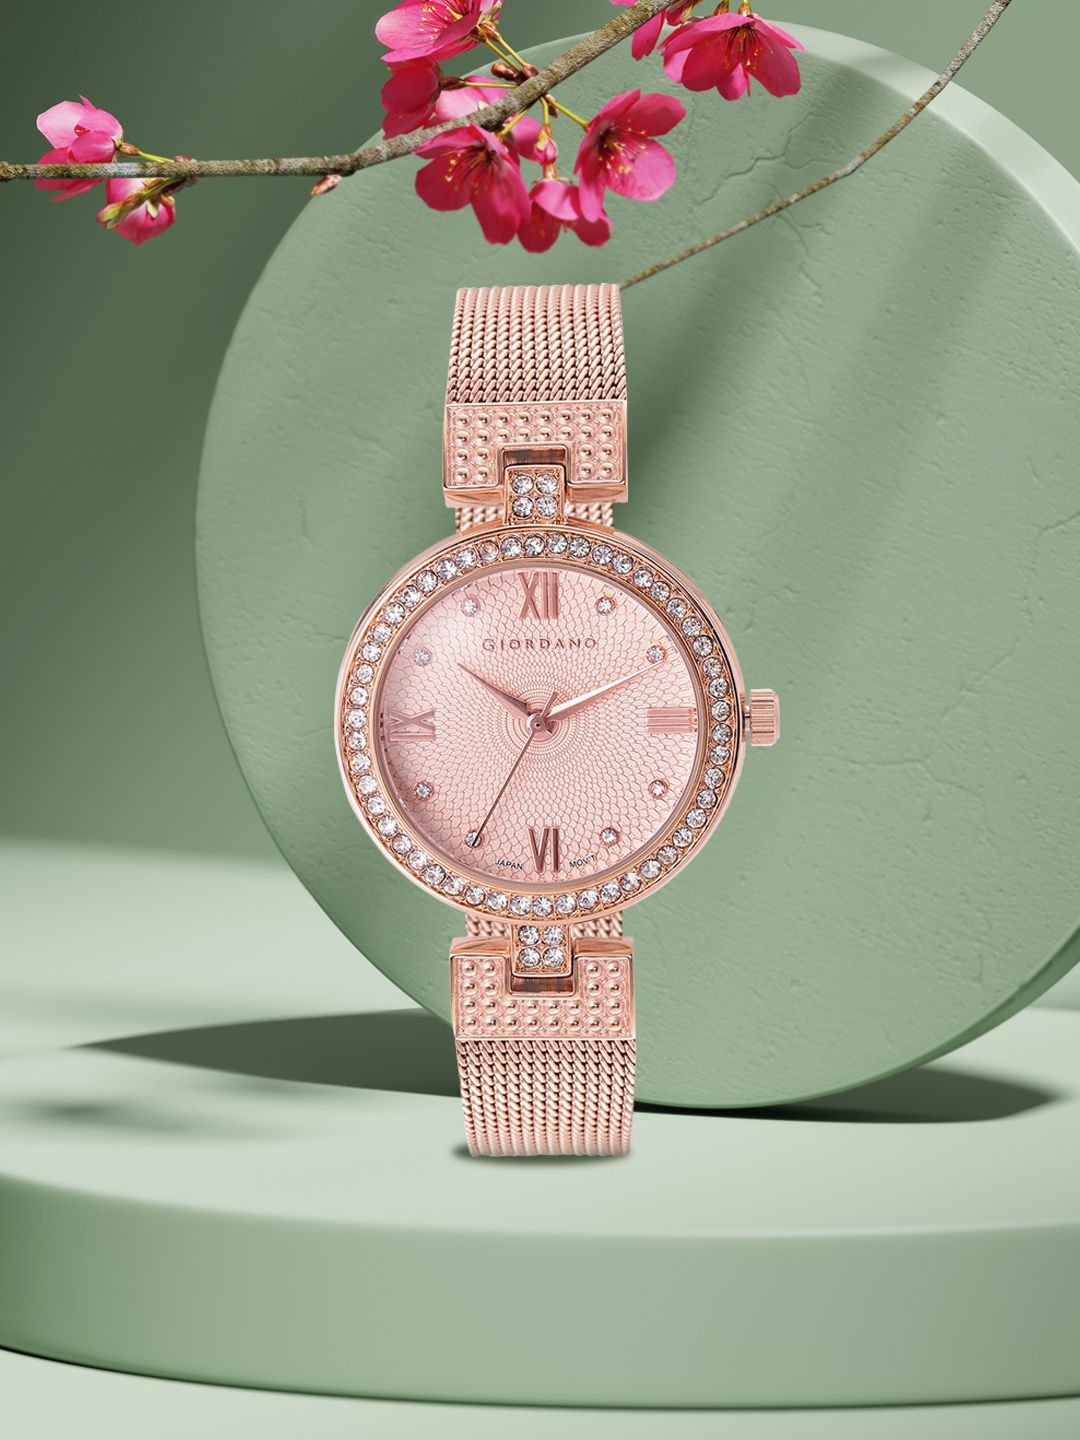 GIORDANO Women Rose Gold-Toned Analogue Watch A2093-44 Price in India